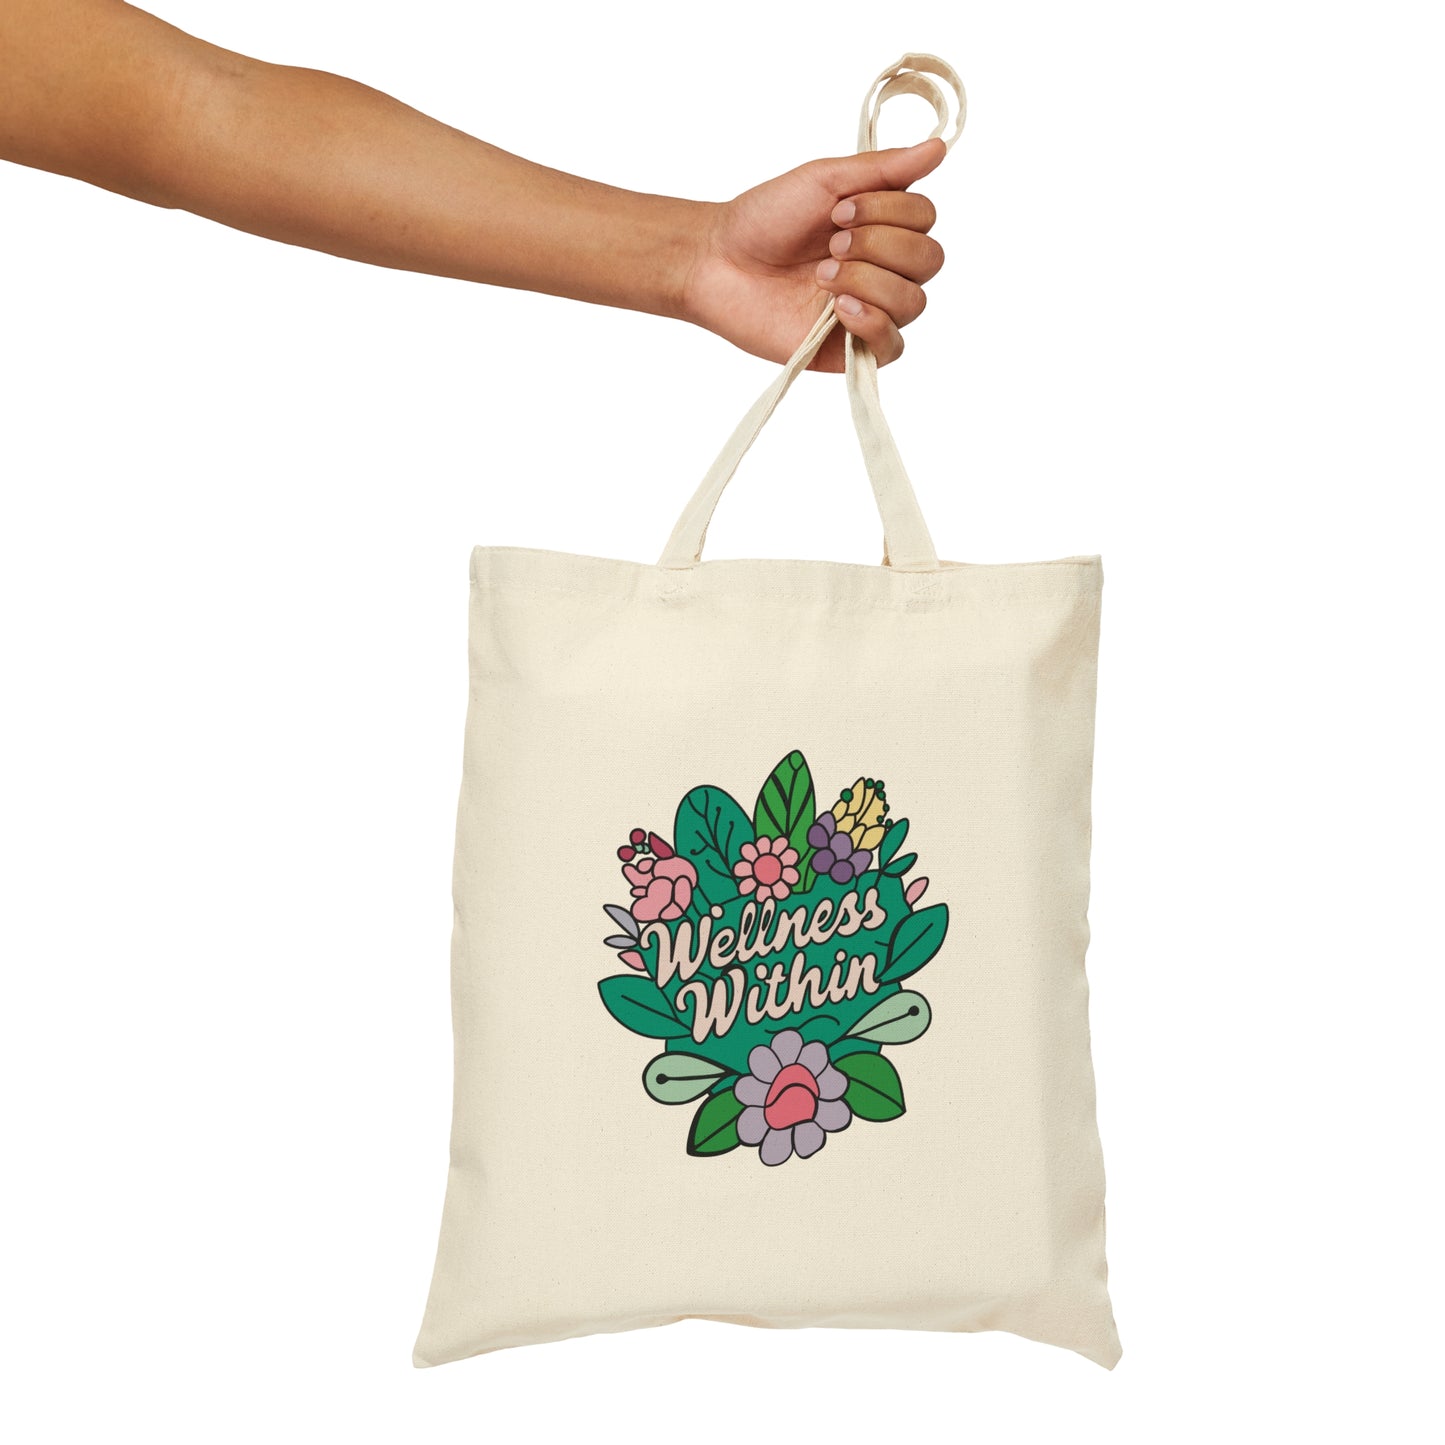 Wellness Within Cotton Canvas Tote Bag